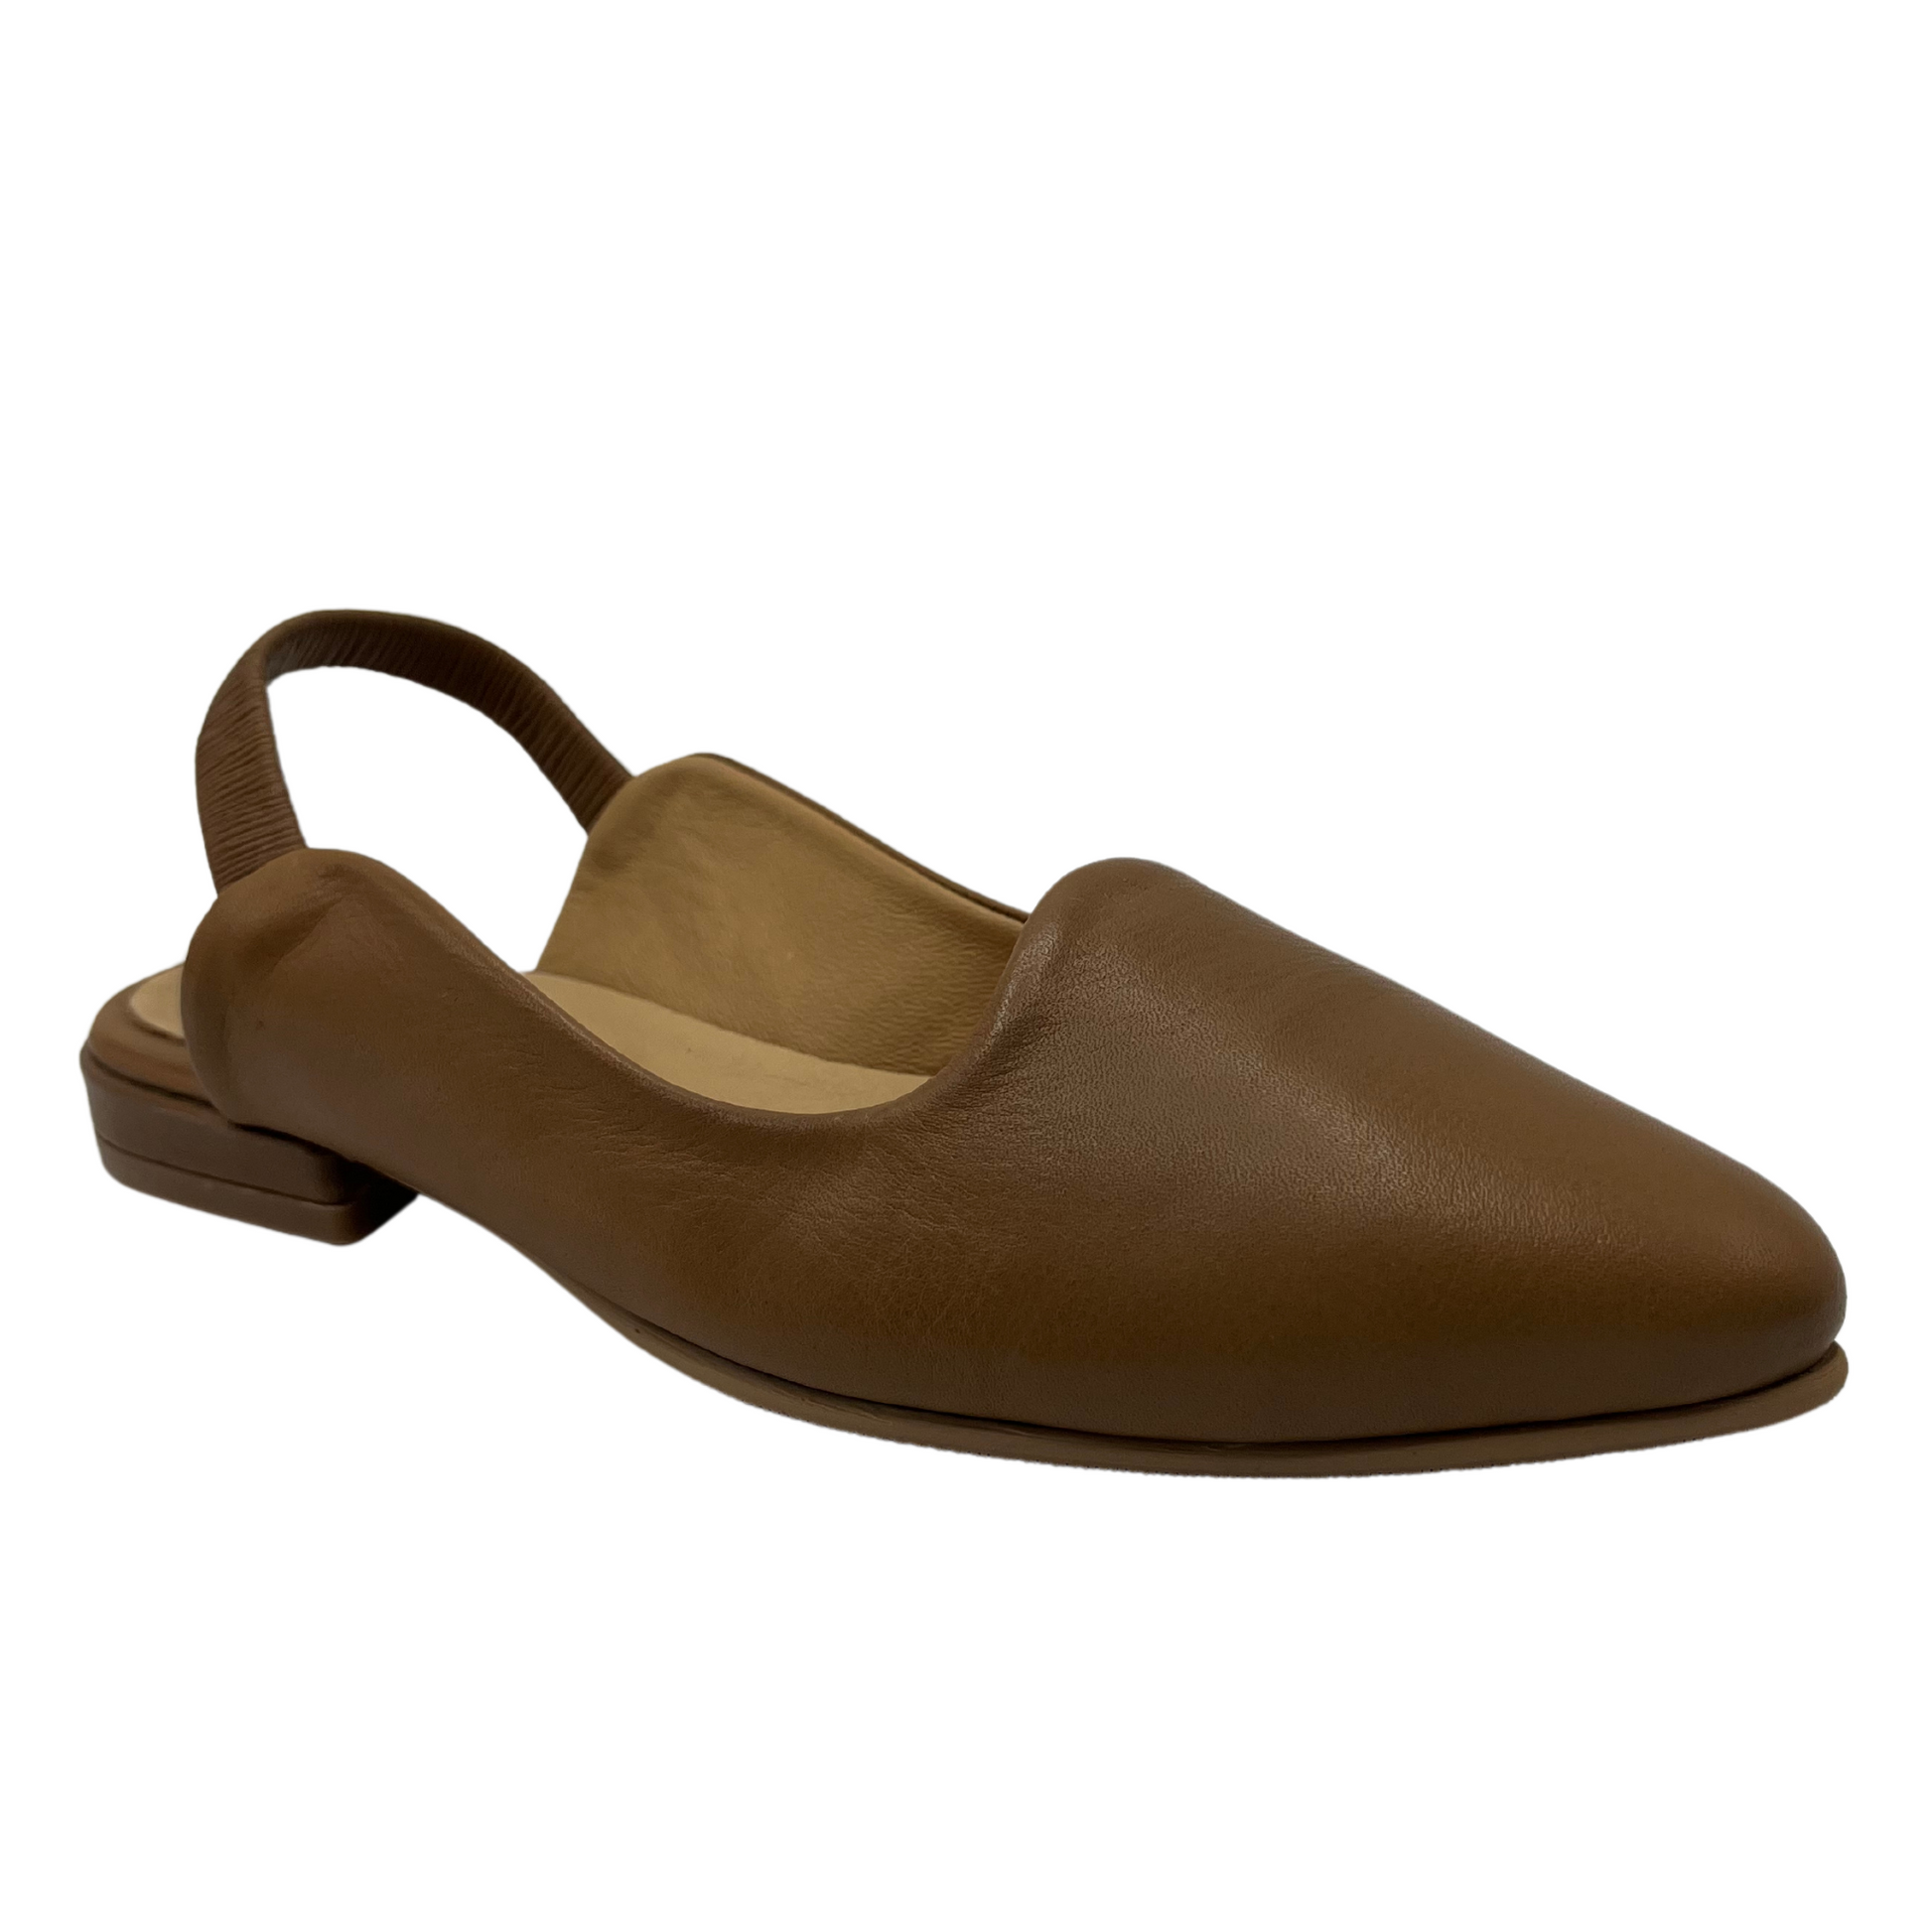 45 degree angled view of walnut leather shoe with pointed toe and slingback strap